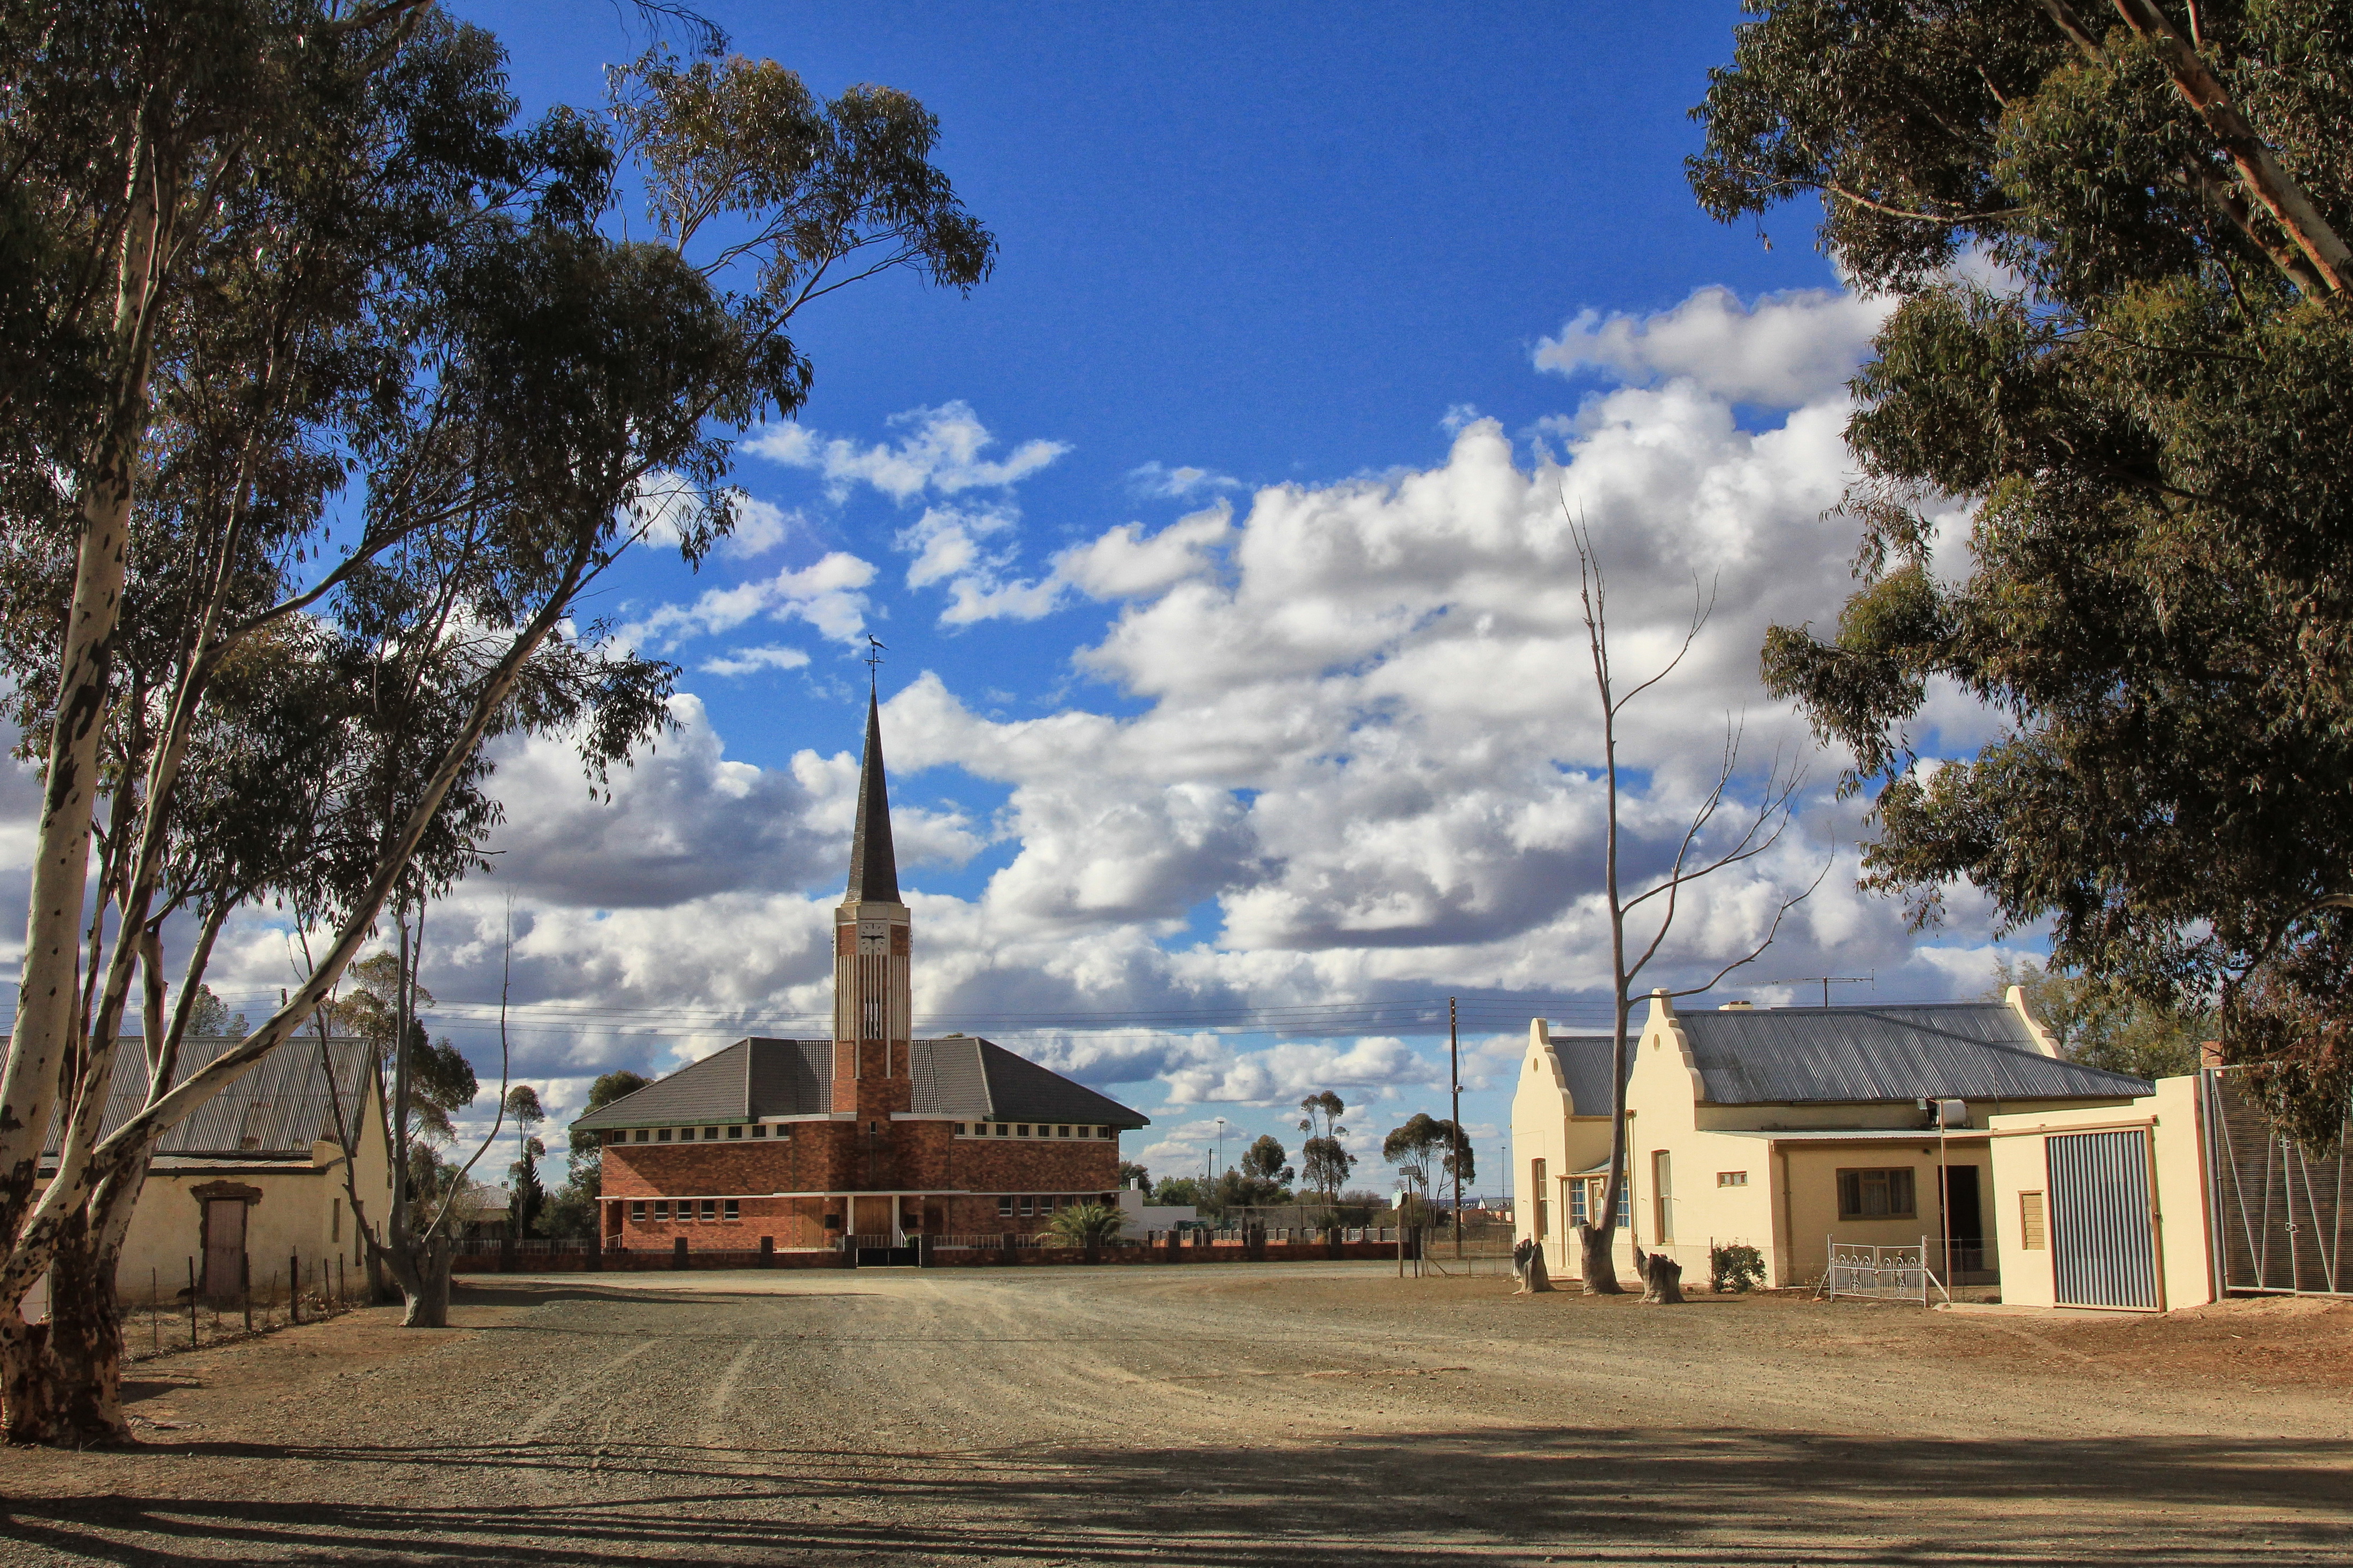 The Moederkerk in the middle of town, with its spire topped by a flying springbok weathervane. Image: Chris Marais